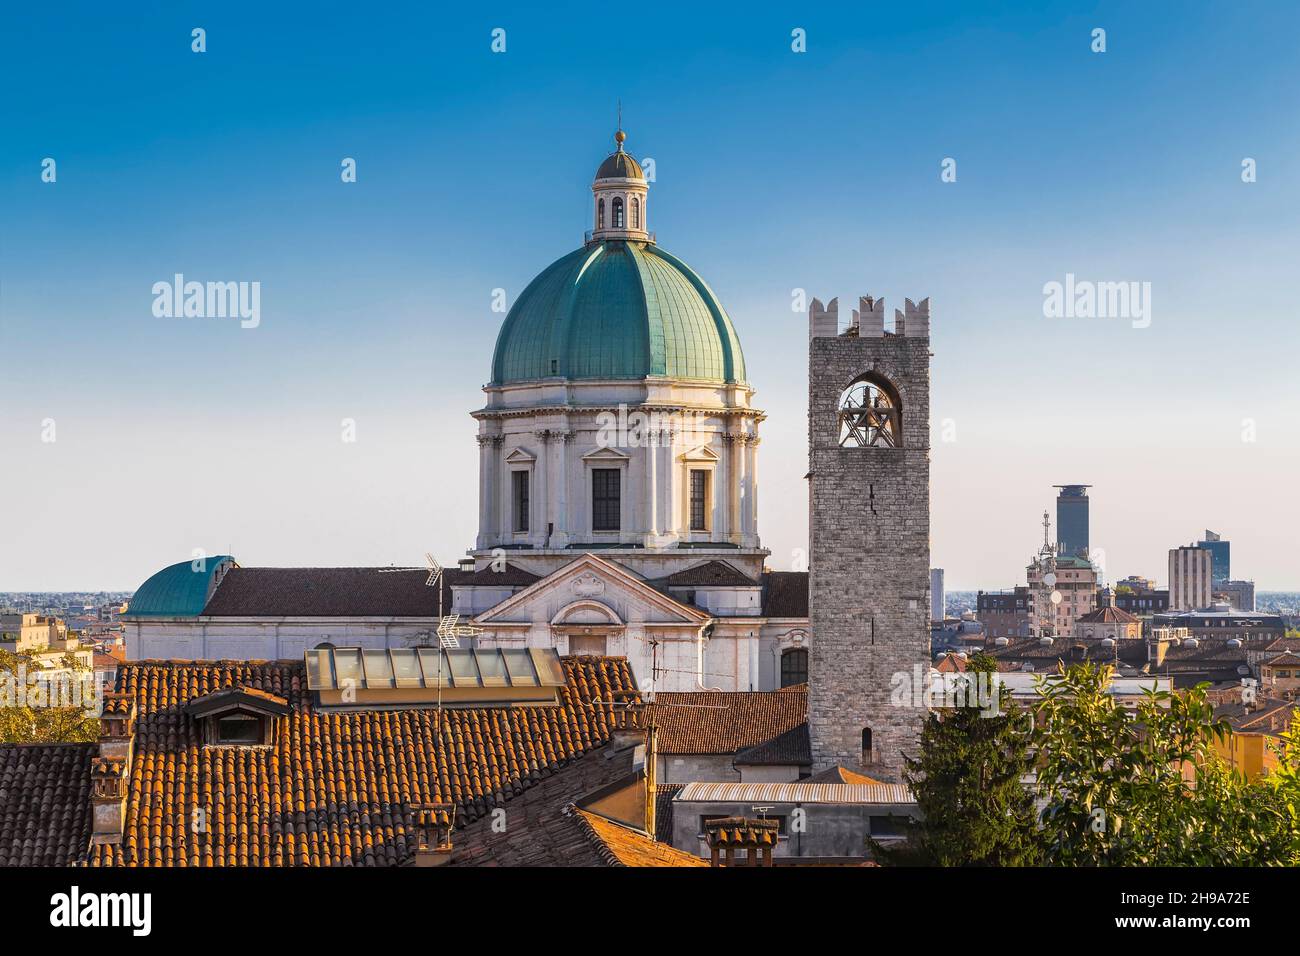 Belfry of the palace of Broletto and dome of the Cathedral of Santa Maria Assunta. Brescia. Italy Stock Photo